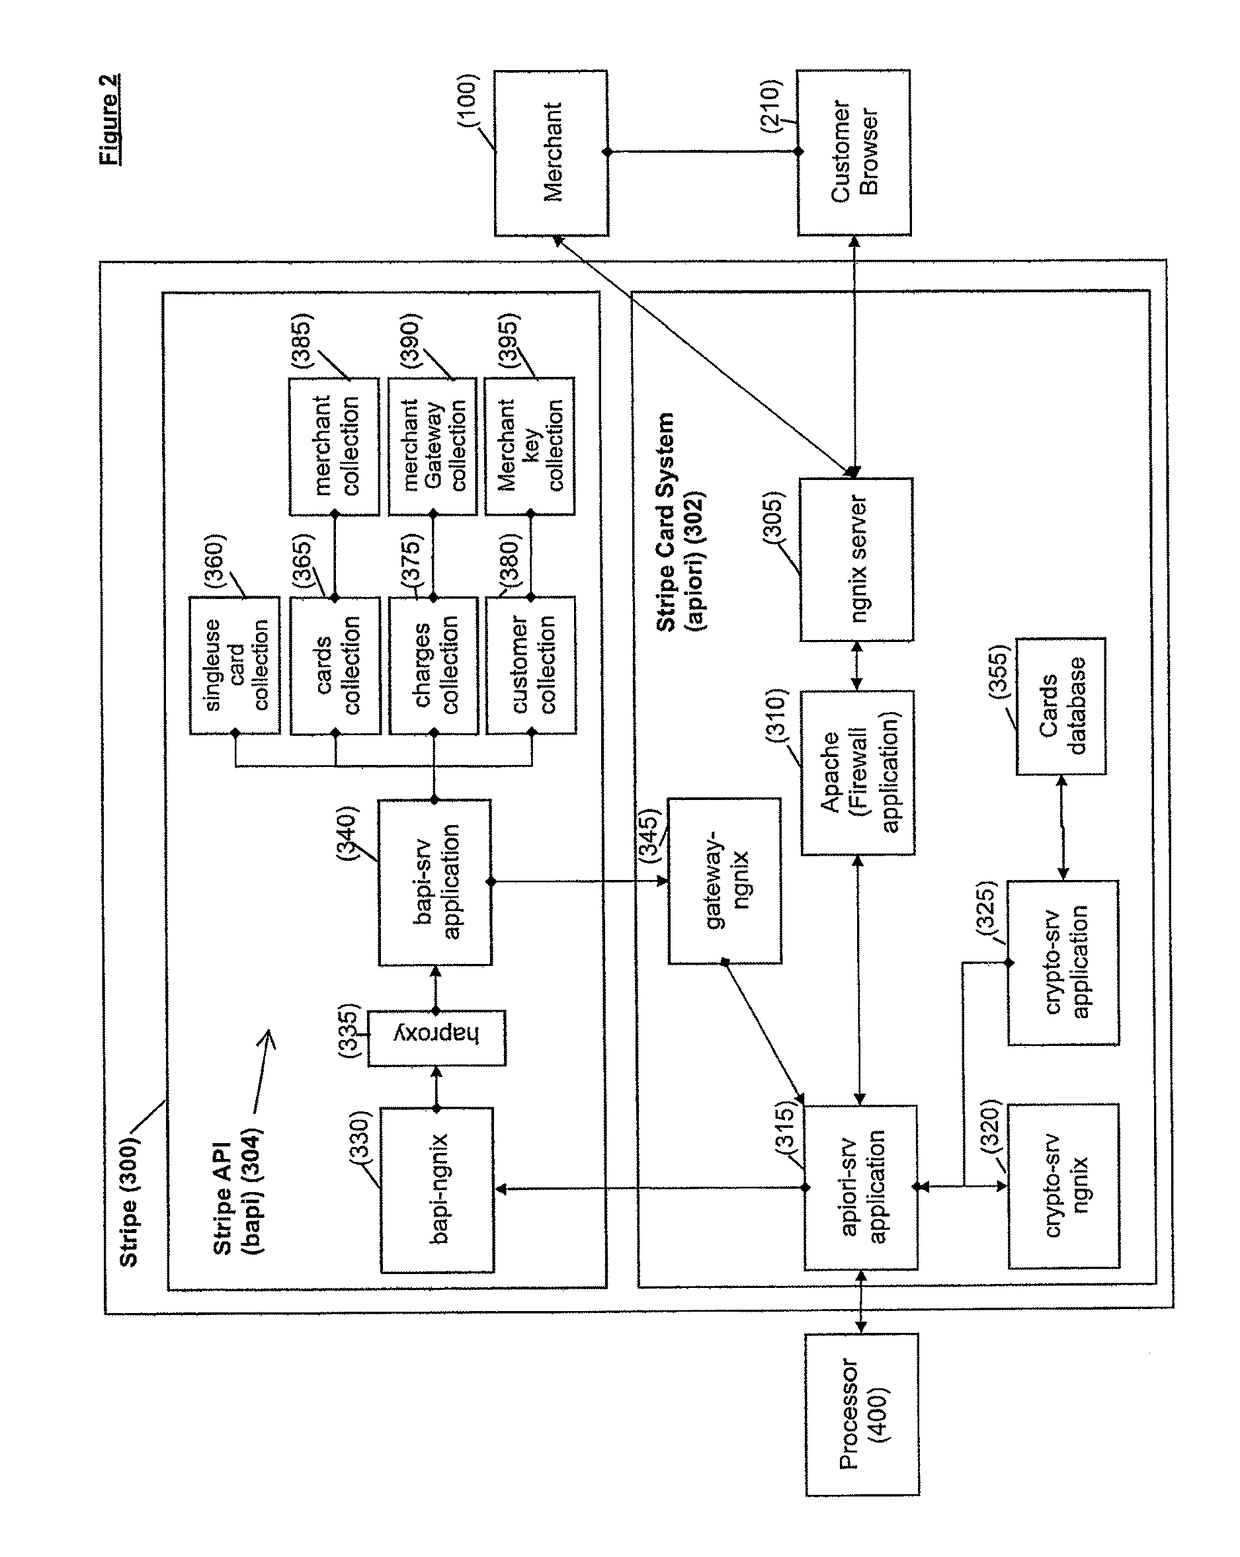 Method and apparatus for performing transactions over a network using cross-origin communication